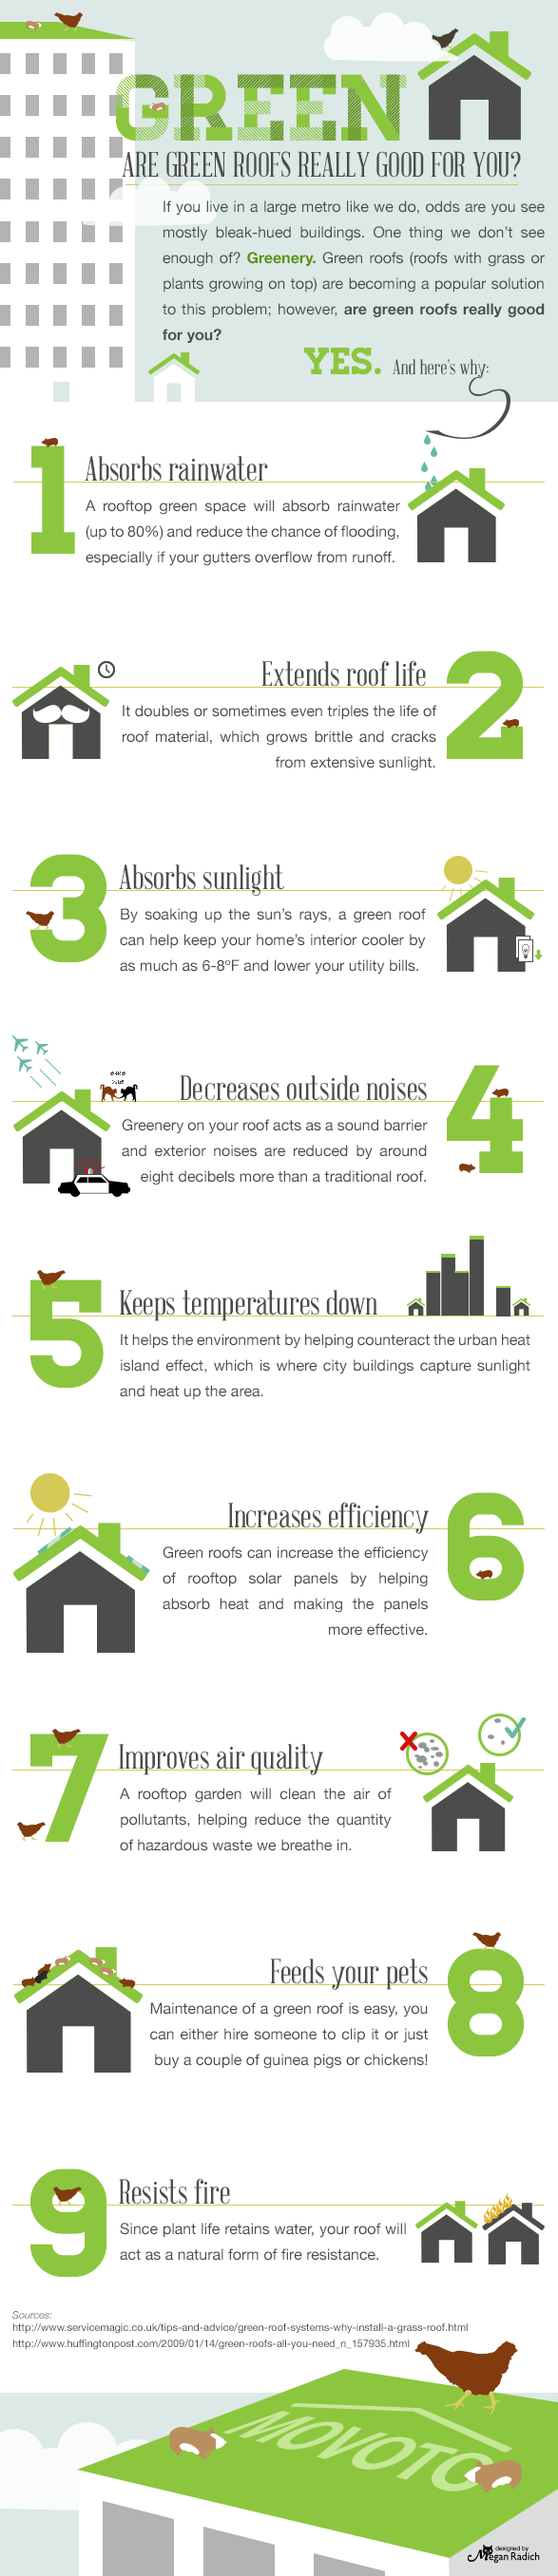 green roof infographic